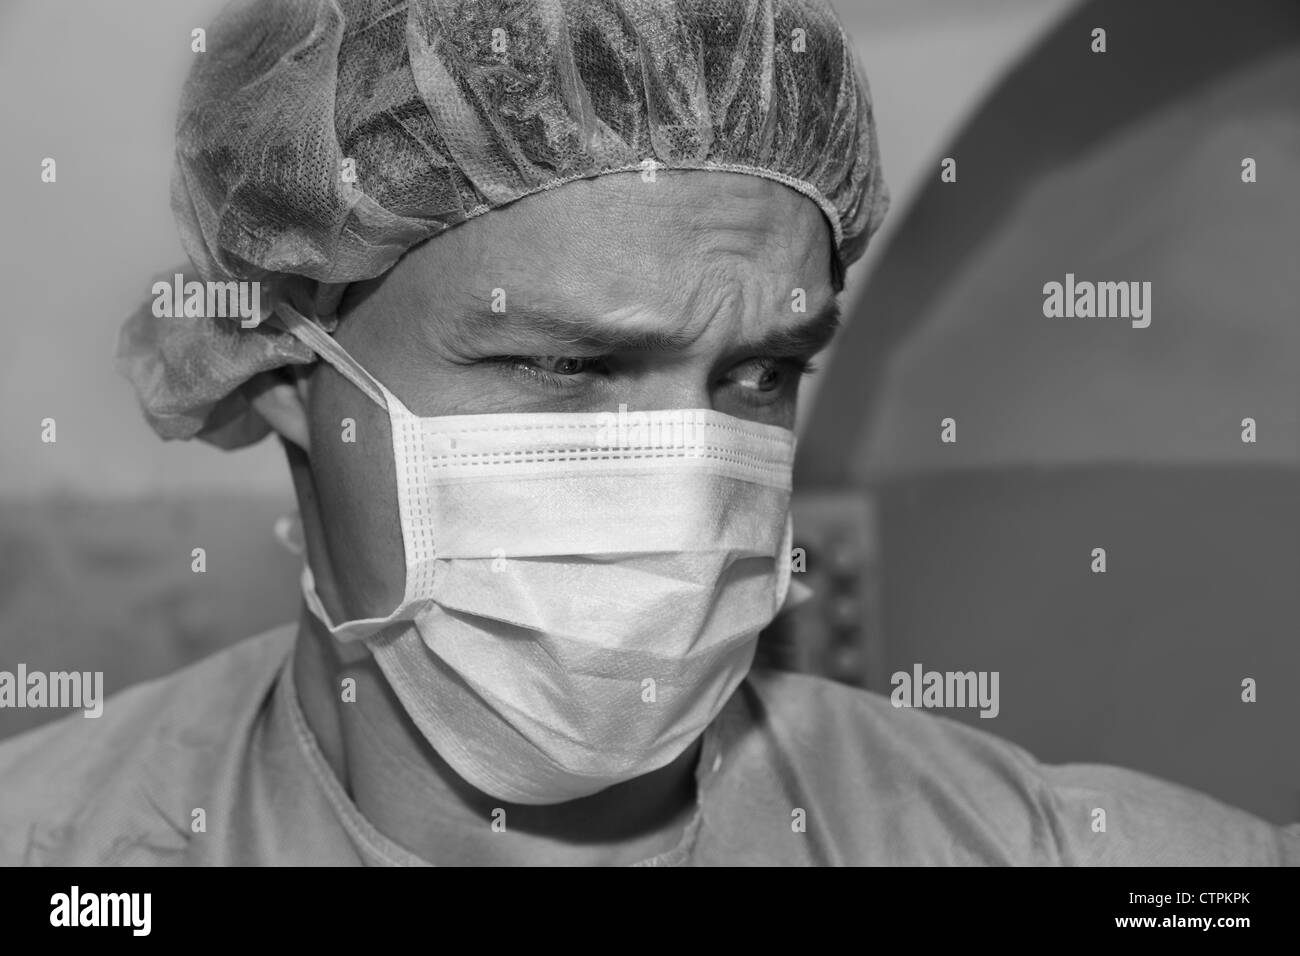 Shaded surgeon have thoughts about coming difficult surgery Stock Photo